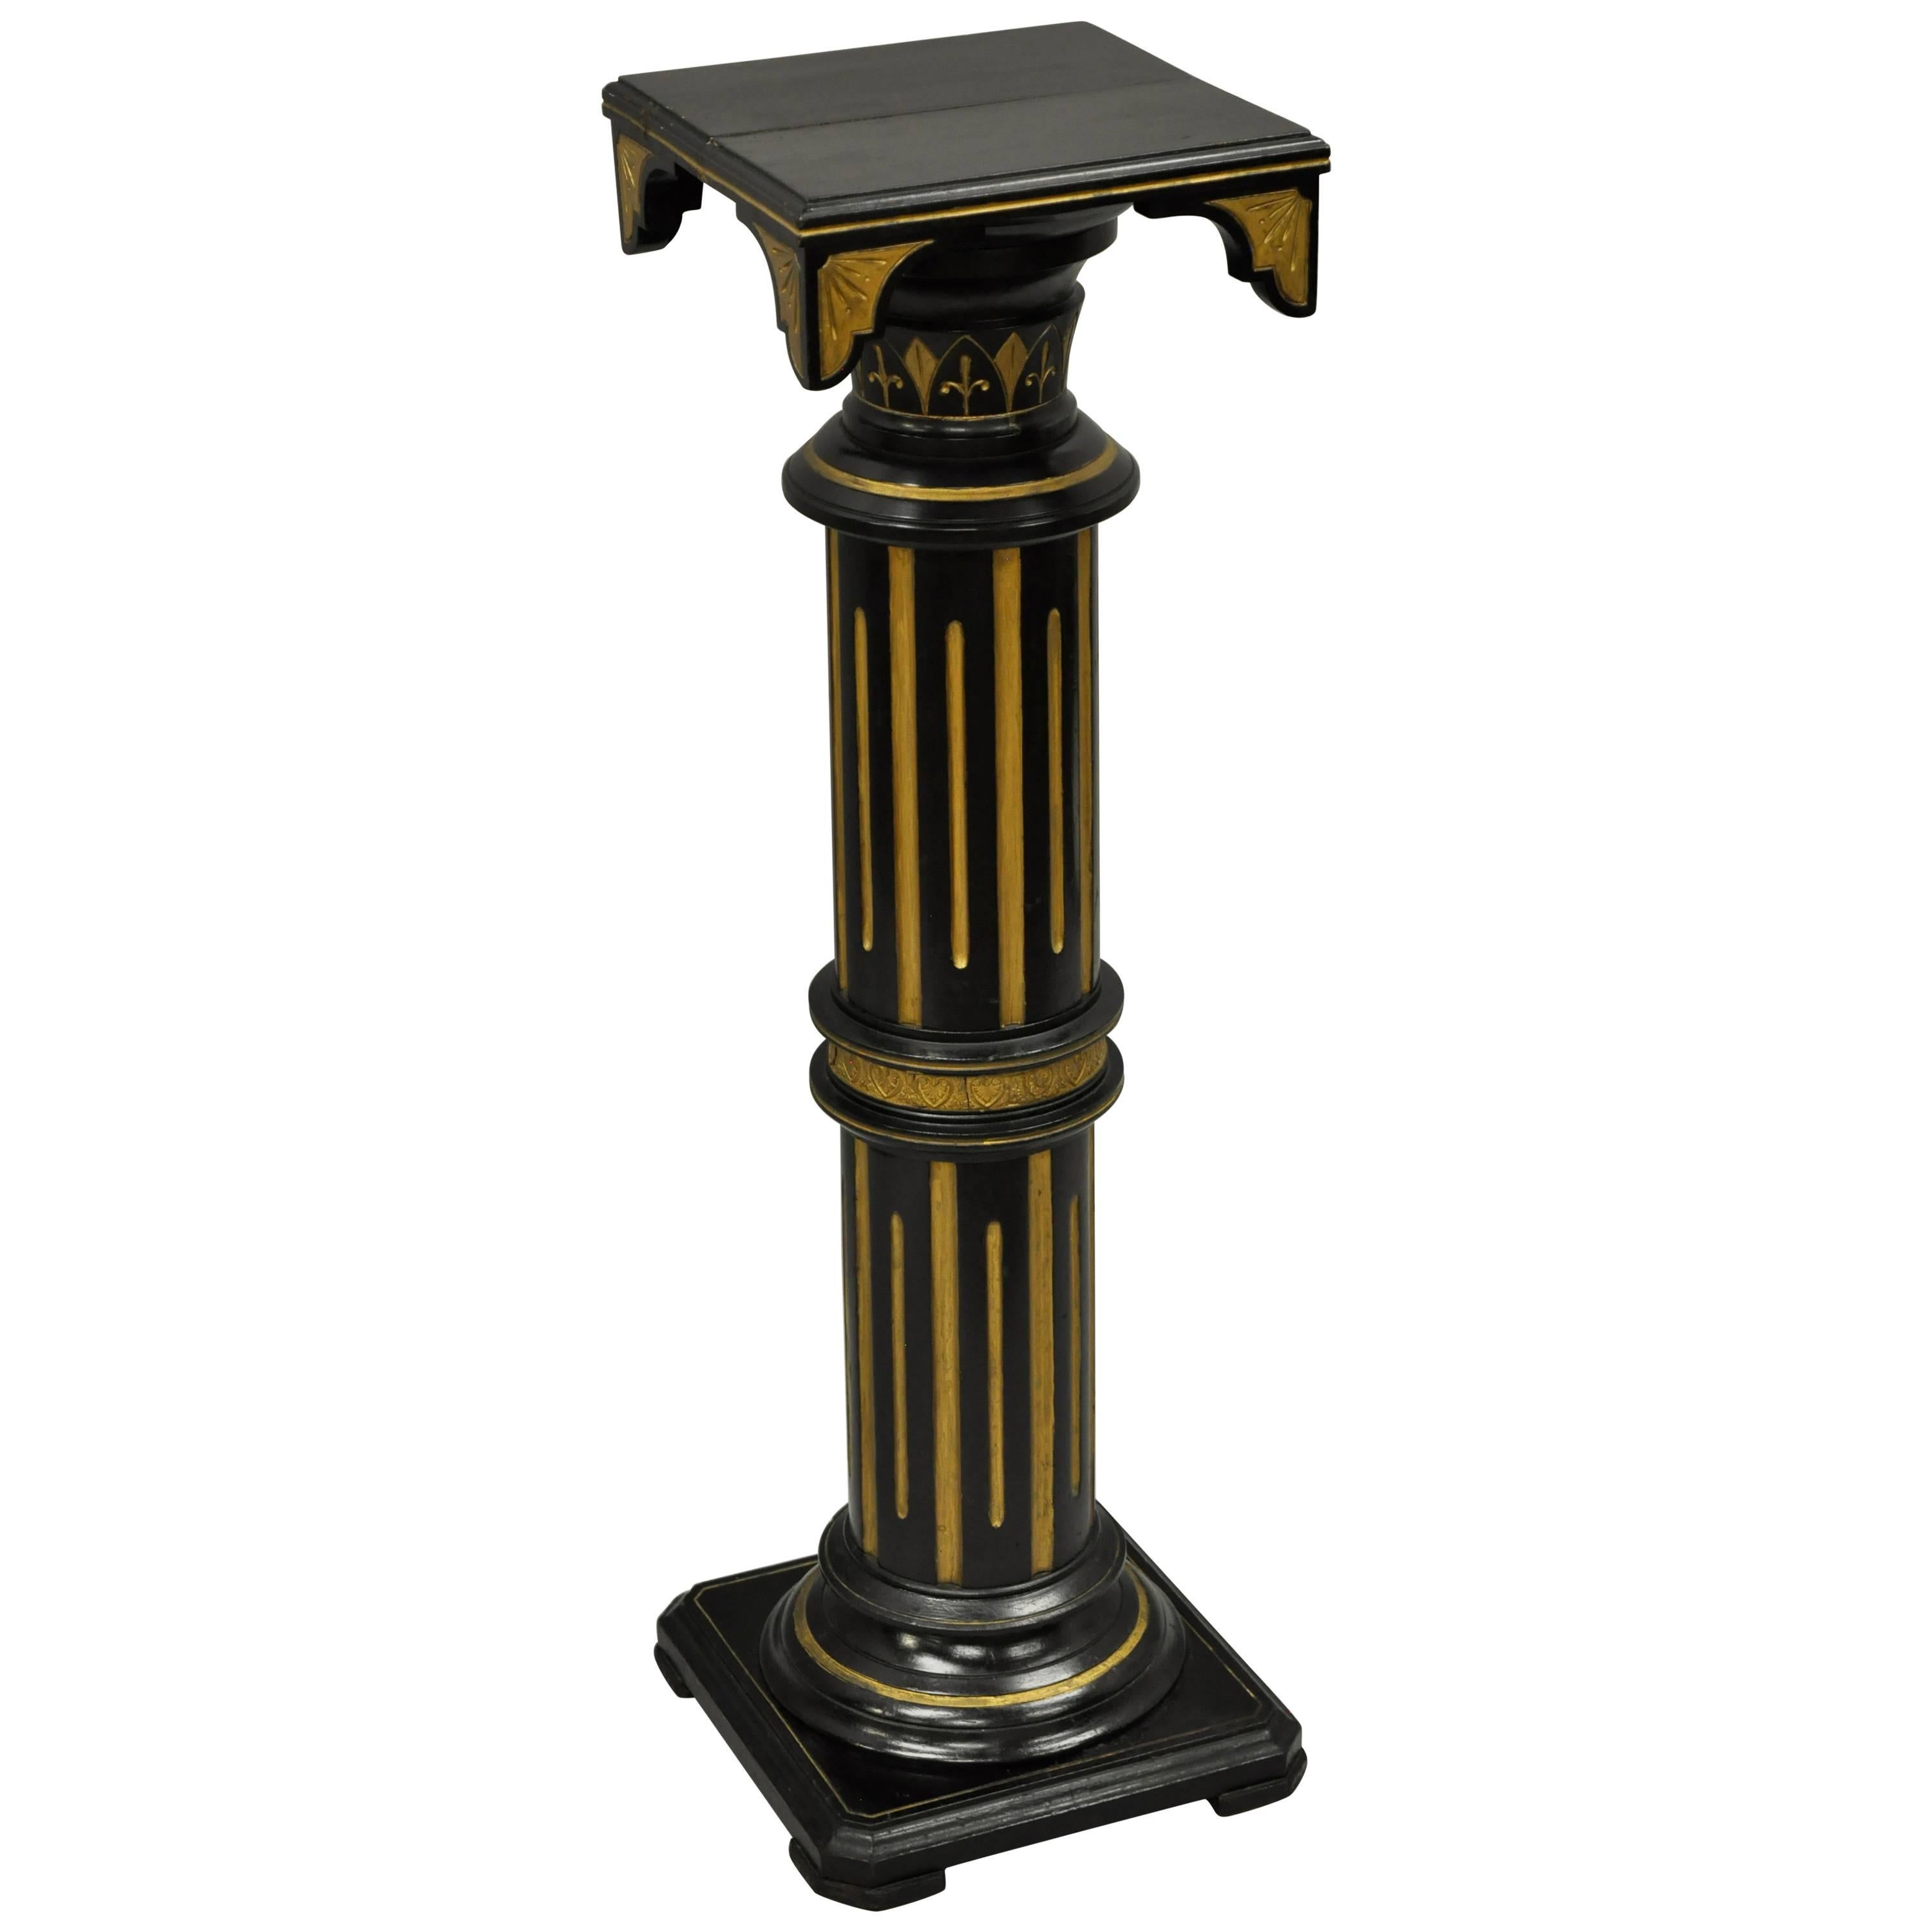 Victorian Aesthetic Column Pedestal Plant Stand Black and Gold Herter Brothers